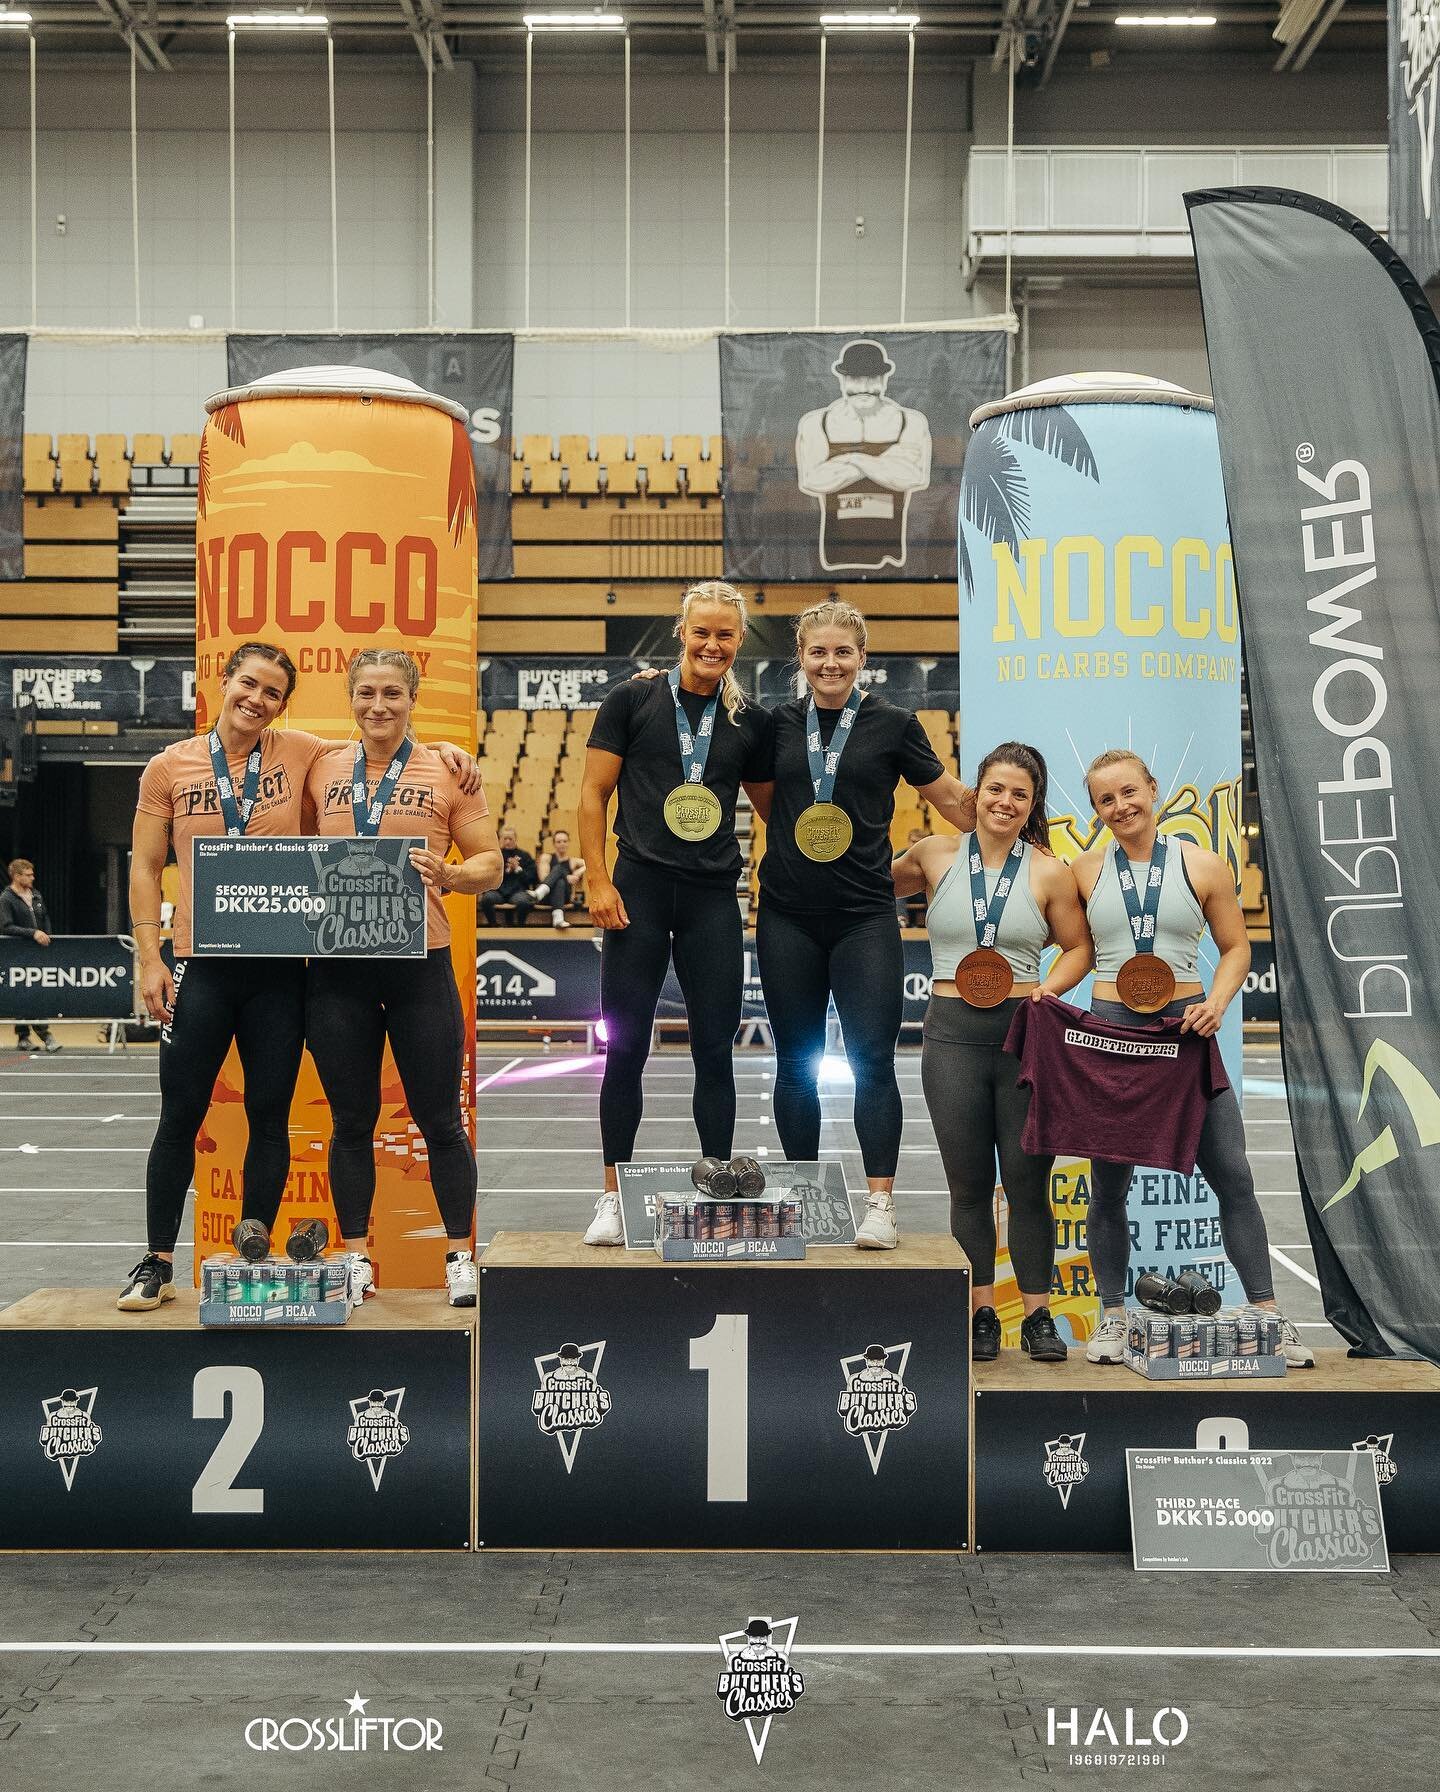 PODIUM - ELITES

You came, you saw, you conquered 🏆

📸 @emilbaggercph 

_______________________________
@butcherslab @newline.halo @crossliftor @noccodanmark 
#butchersclassics #crossfit #competition #completetestoffitness #competitioncorner 
_____